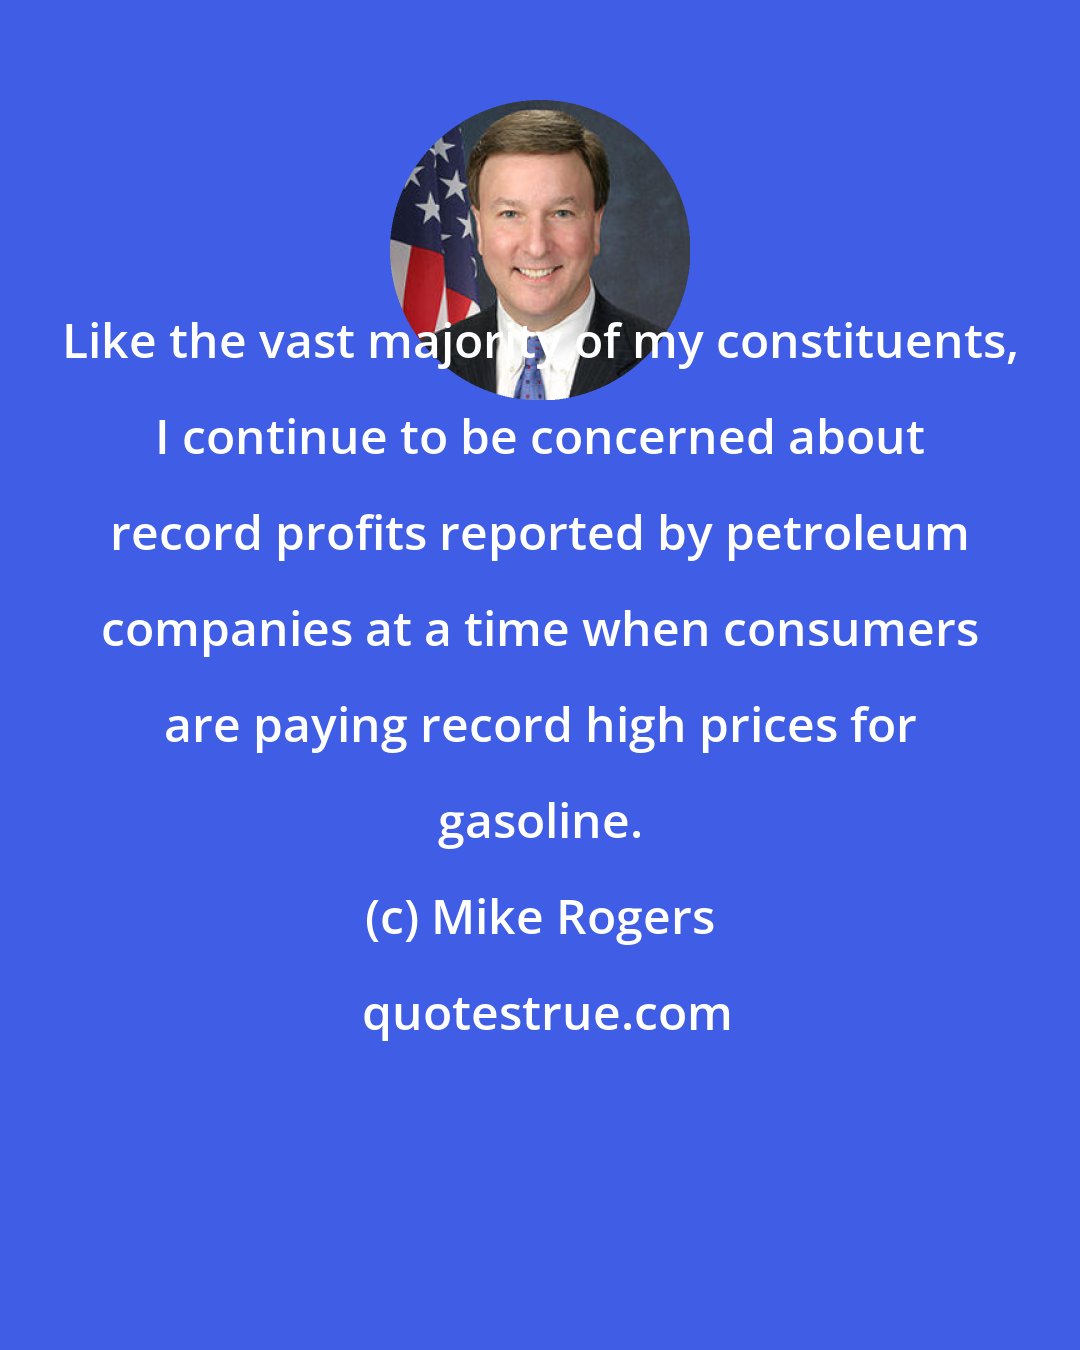 Mike Rogers: Like the vast majority of my constituents, I continue to be concerned about record profits reported by petroleum companies at a time when consumers are paying record high prices for gasoline.